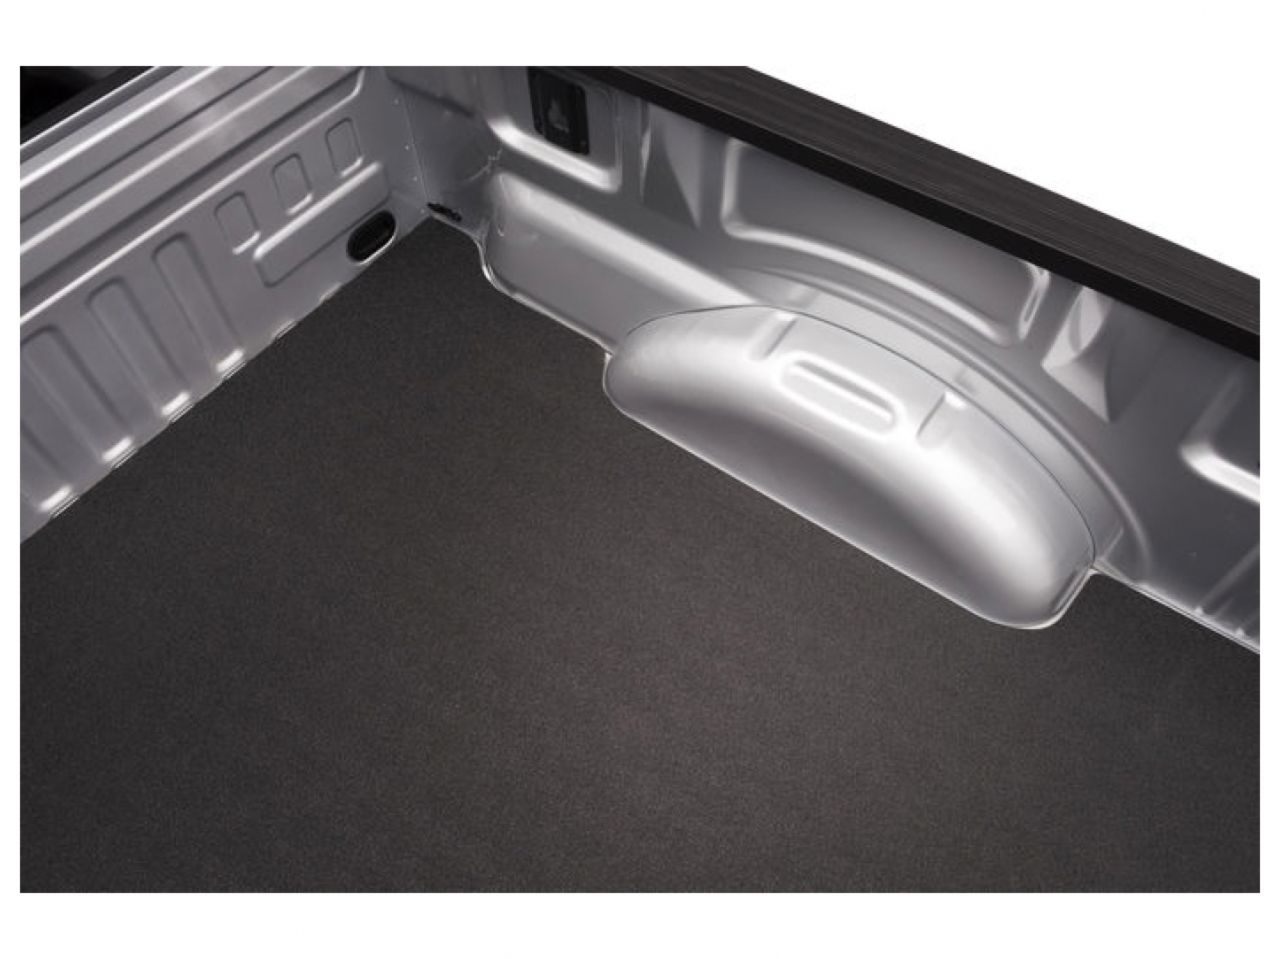 Bedrug Impact Mat For Spray-In Or No Bed Liner 02-18 (19 Classic) Dodge Ram 8